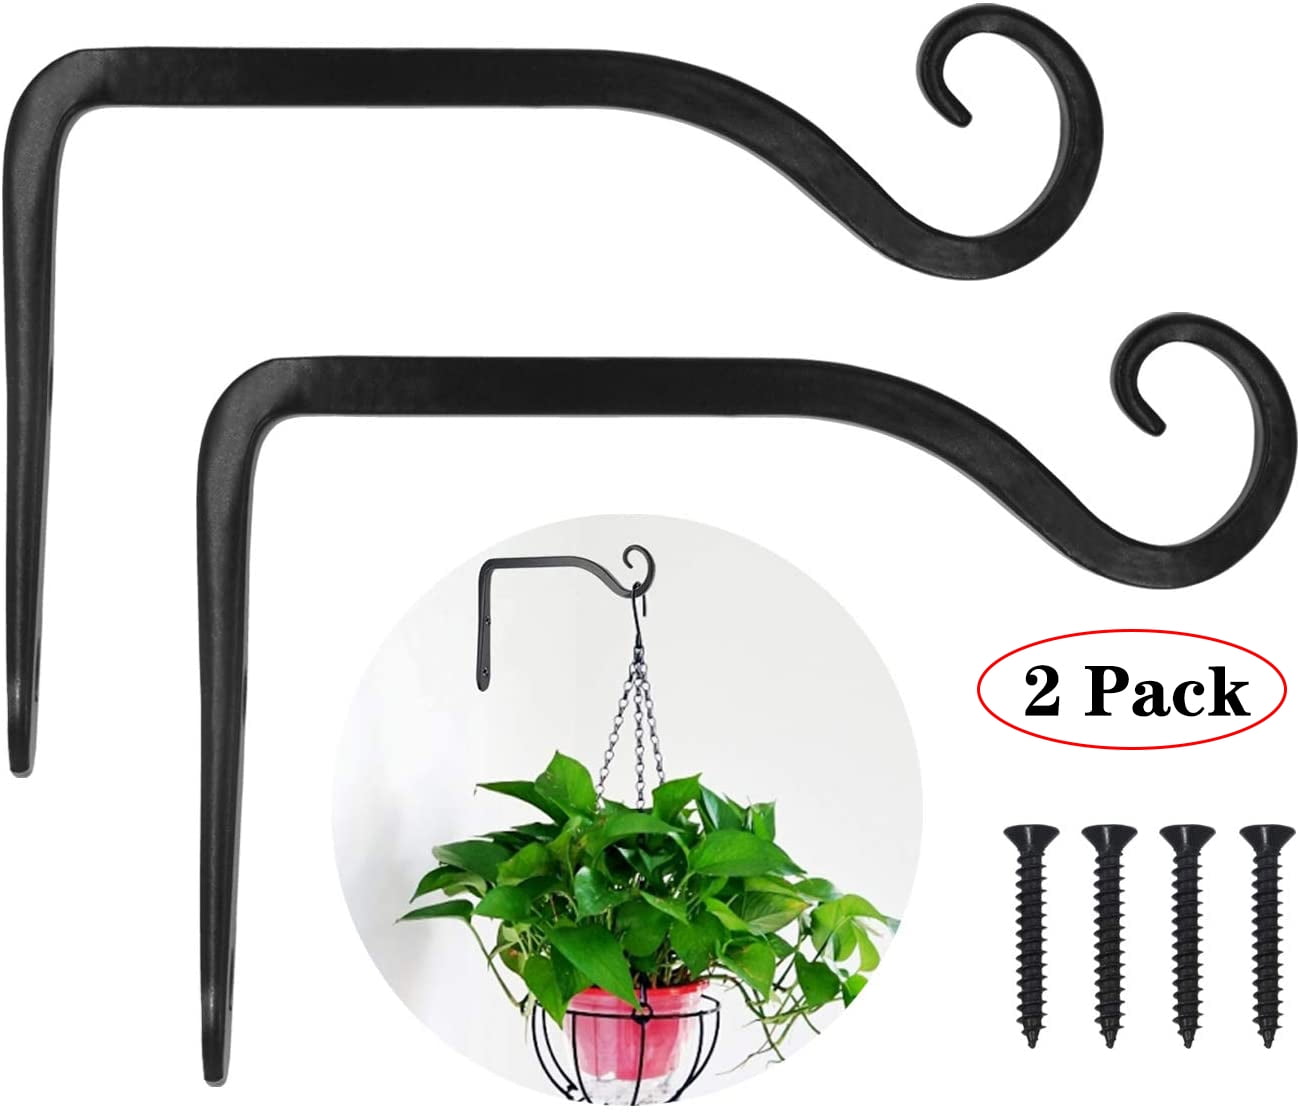 Wind Chimes Planters Lanterns TIMESETL 10 Pack Rustic Iron Wall Hooks Set Metal Lantern Bracket Plant Hangers for Hanging Bird Feeders Coats 1.6 Inch Vintage Home Decor Indoor & Outdoor